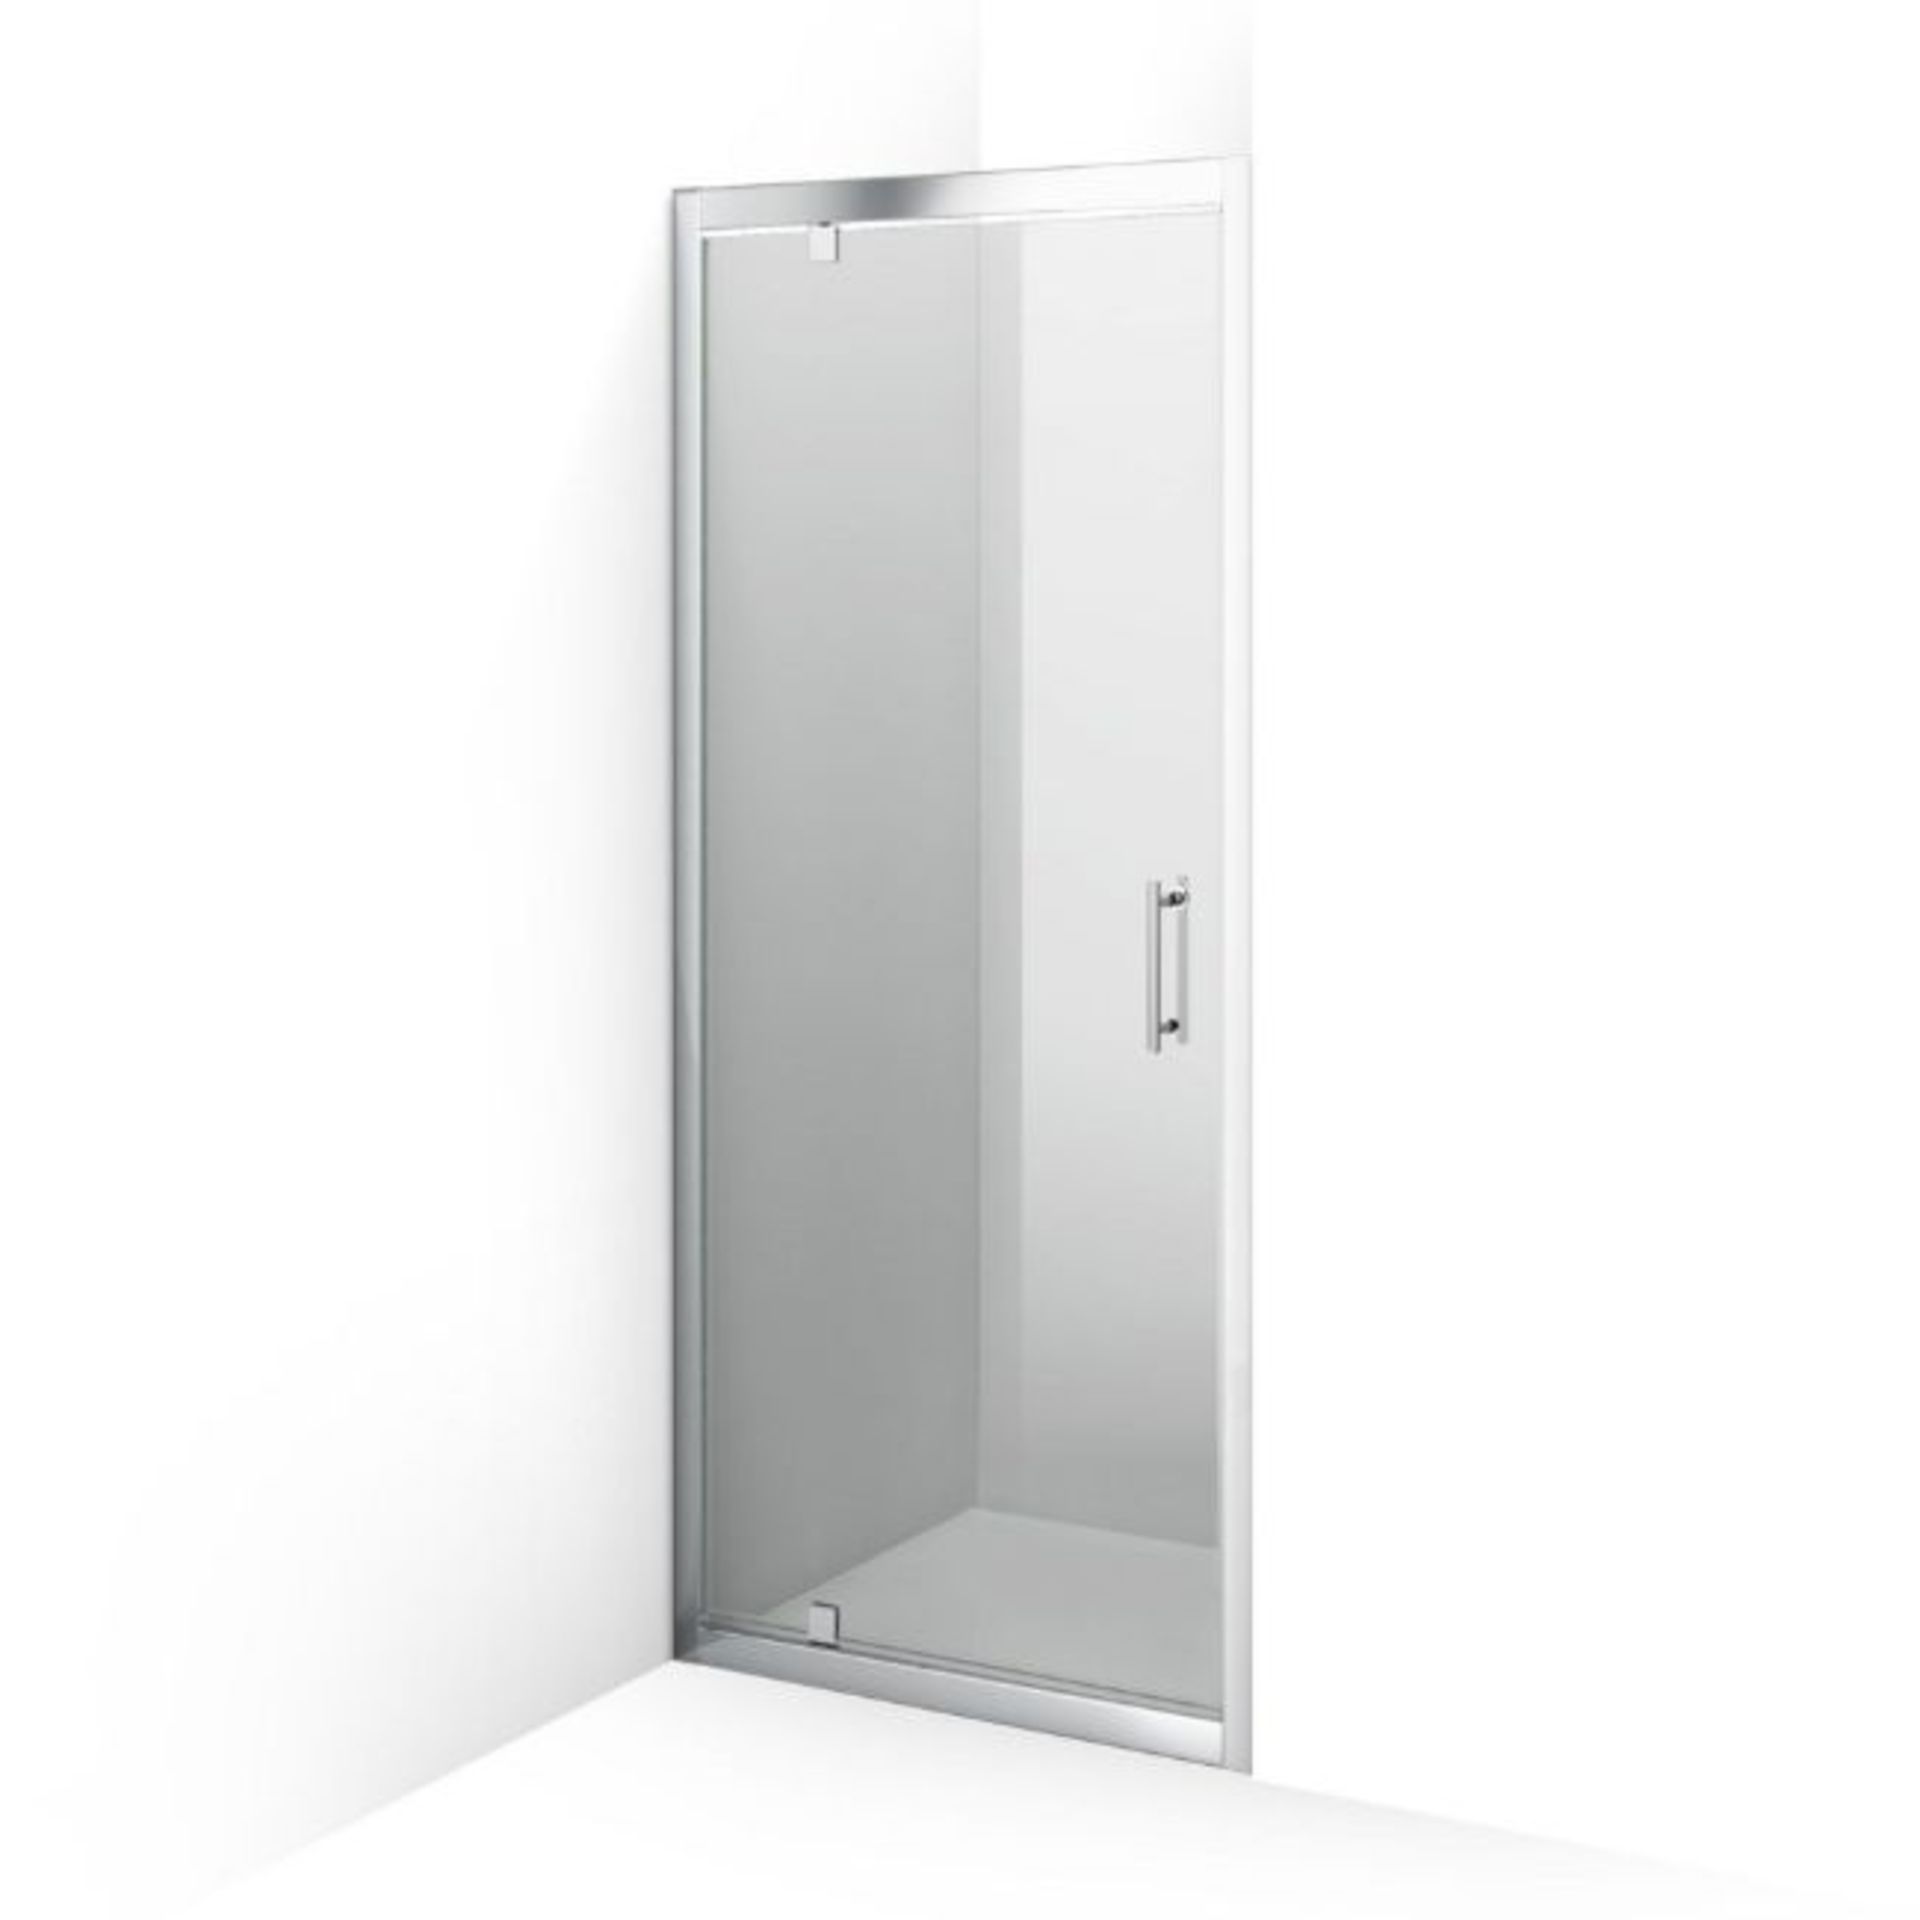 New & Boxed Twyfords 700mm - 6mm - Premium Pivot Shower Door.RRP £299.99.Of2100Cp.8mm Safety Glass - Image 2 of 2